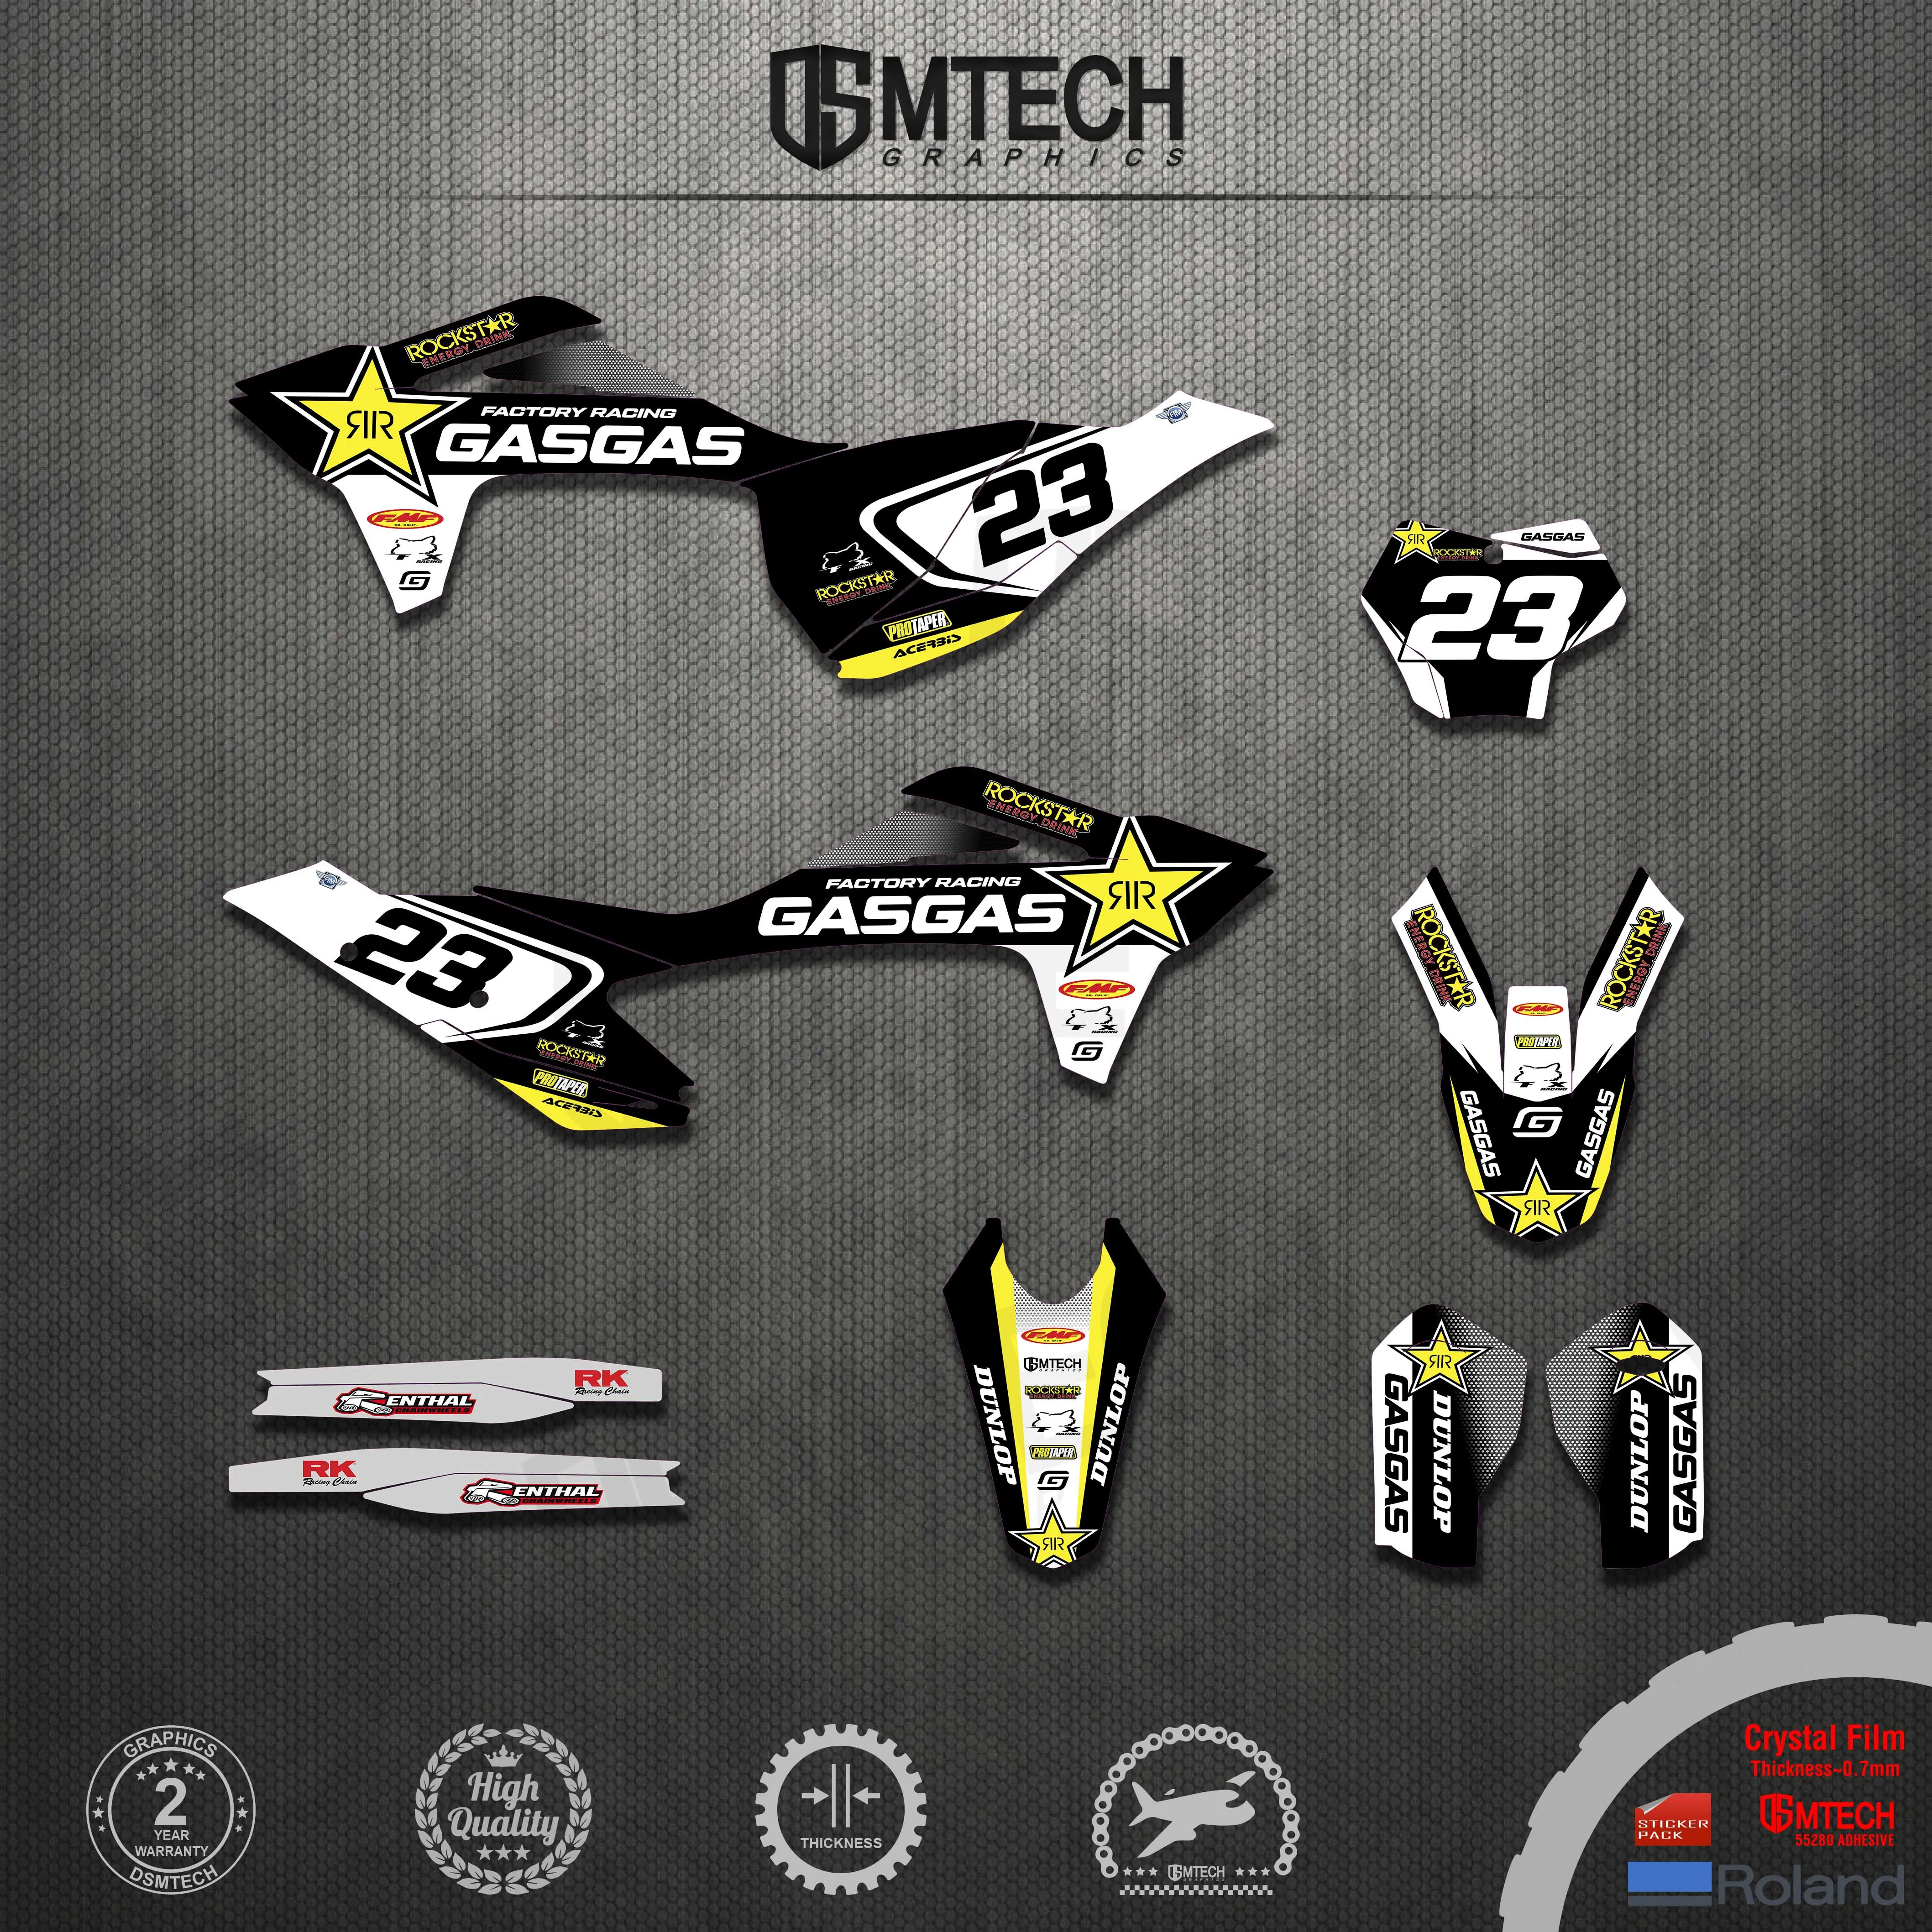 DSMTECH Customized Team Graphics Backgrounds Decals Custom Stickers For GASGAS 2021 2022 2023  EC MC